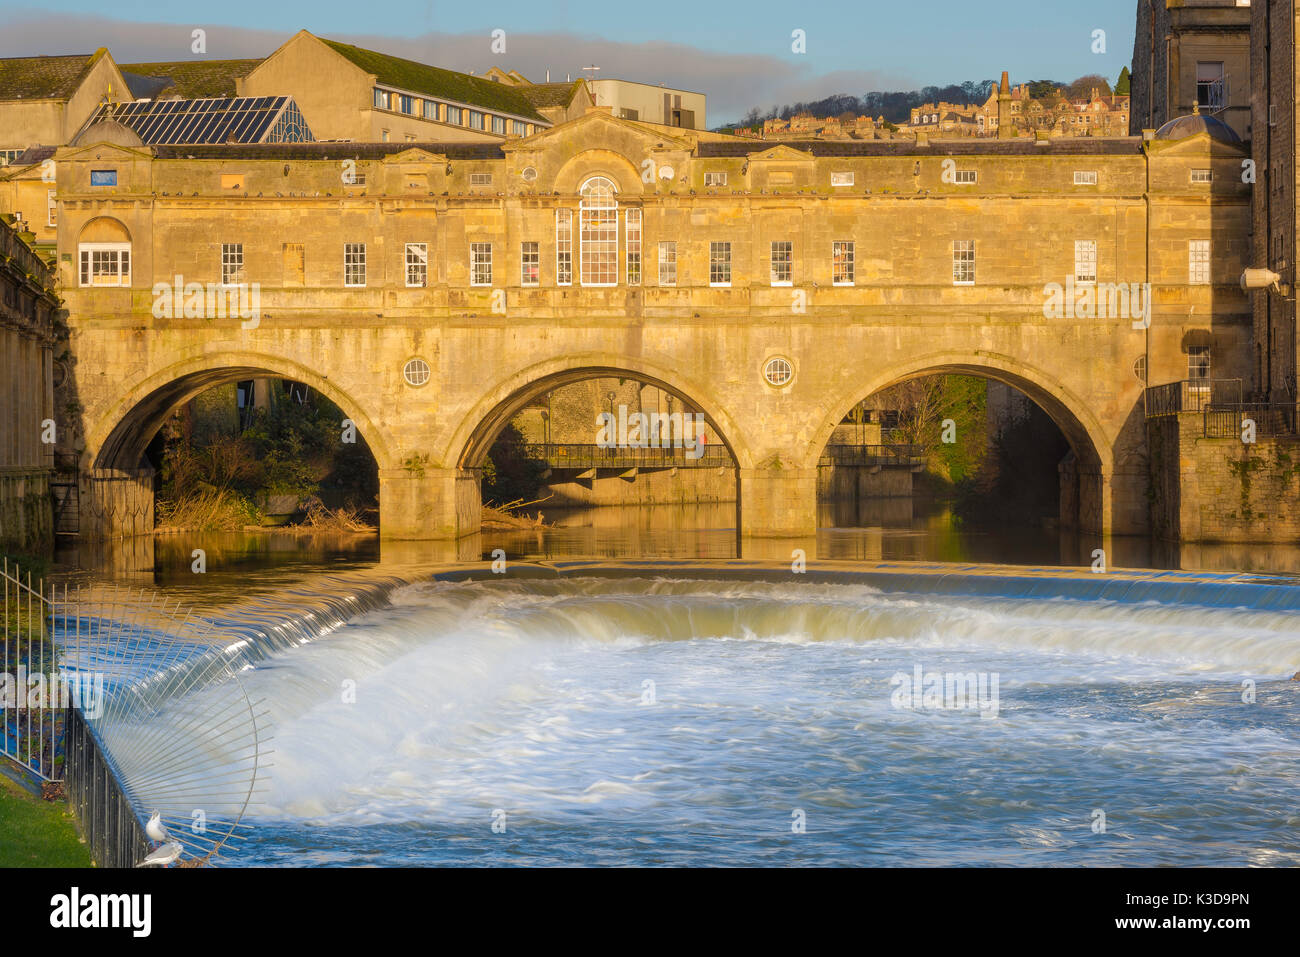 Bath bridge UK, view of the the Robert Adam designed Pulteney Bridge in Bath with the city weir on the River Avon in the foreground, UK Stock Photo